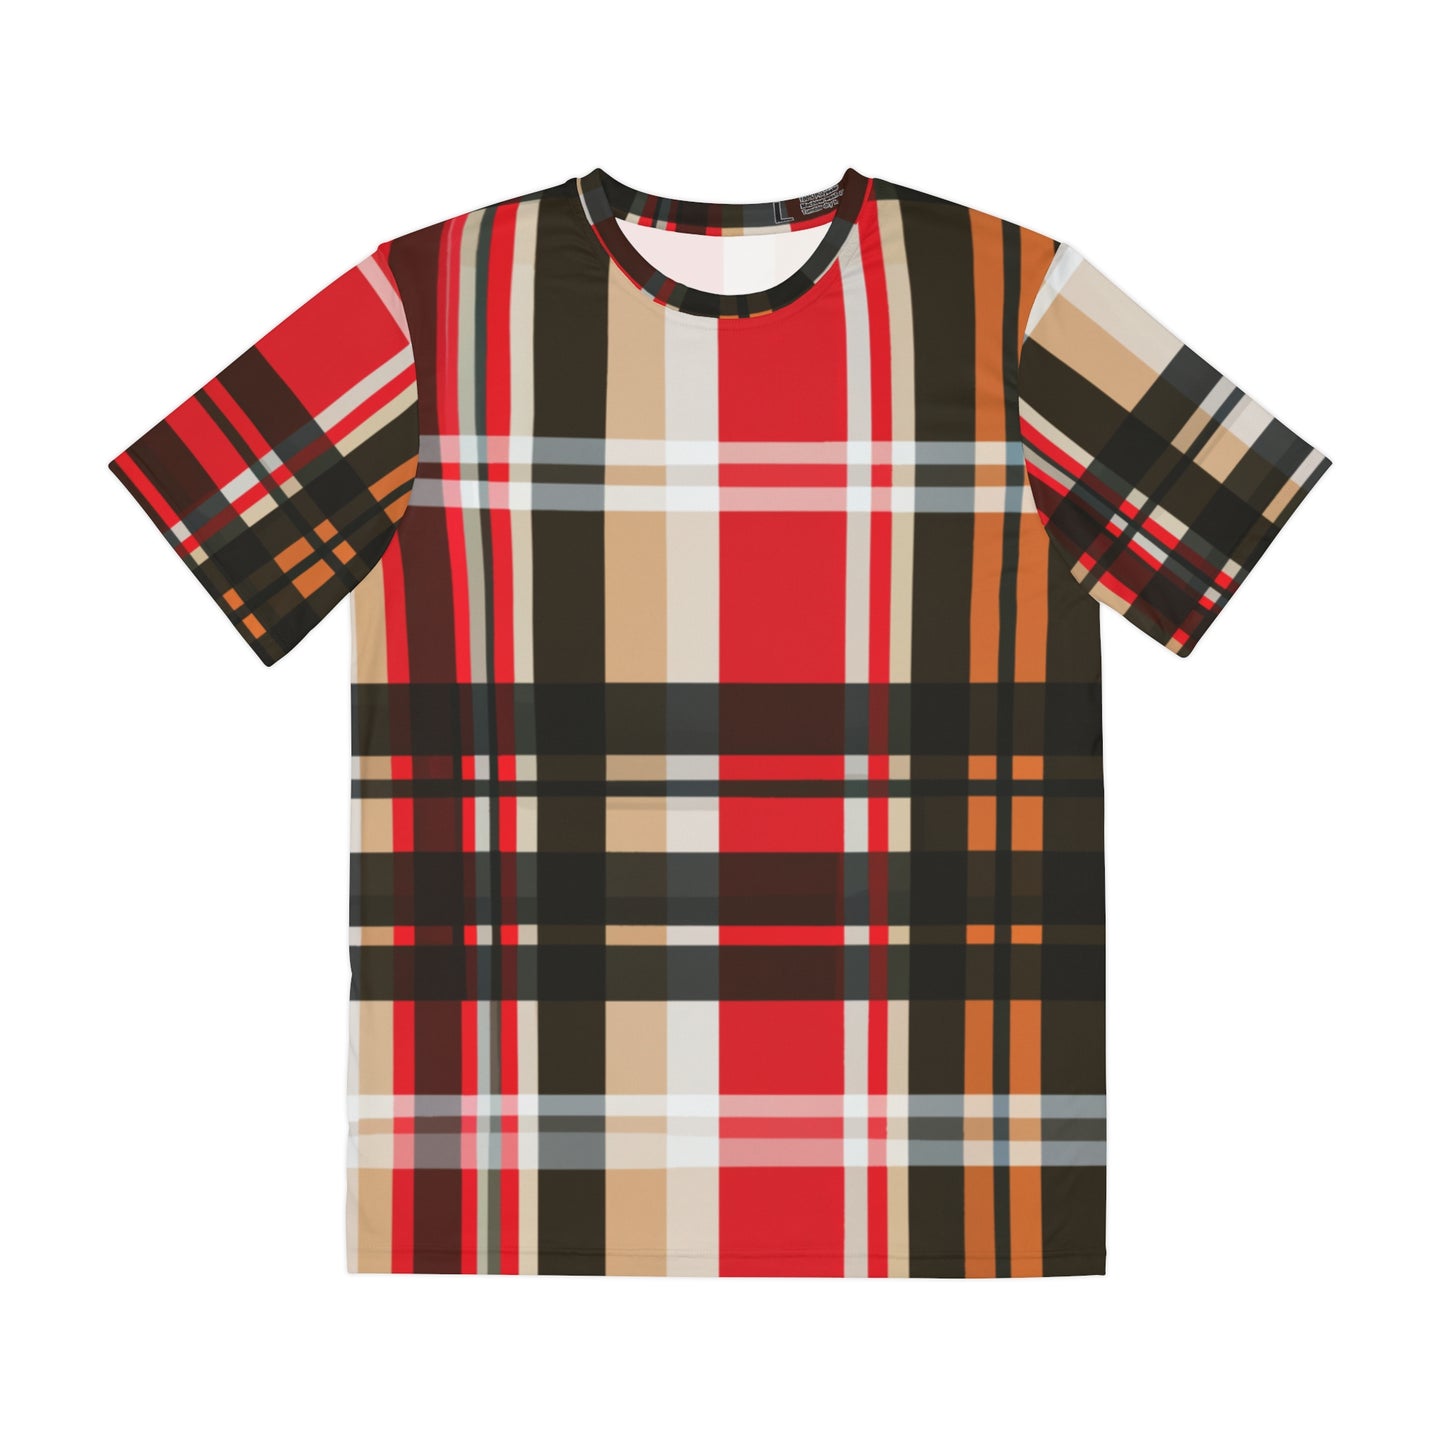 Front view of the Glasgow Plaid Crewneck Pullover All-Over Print Short-Sleeved Shirt red black white yellow mustard plaid pattern 